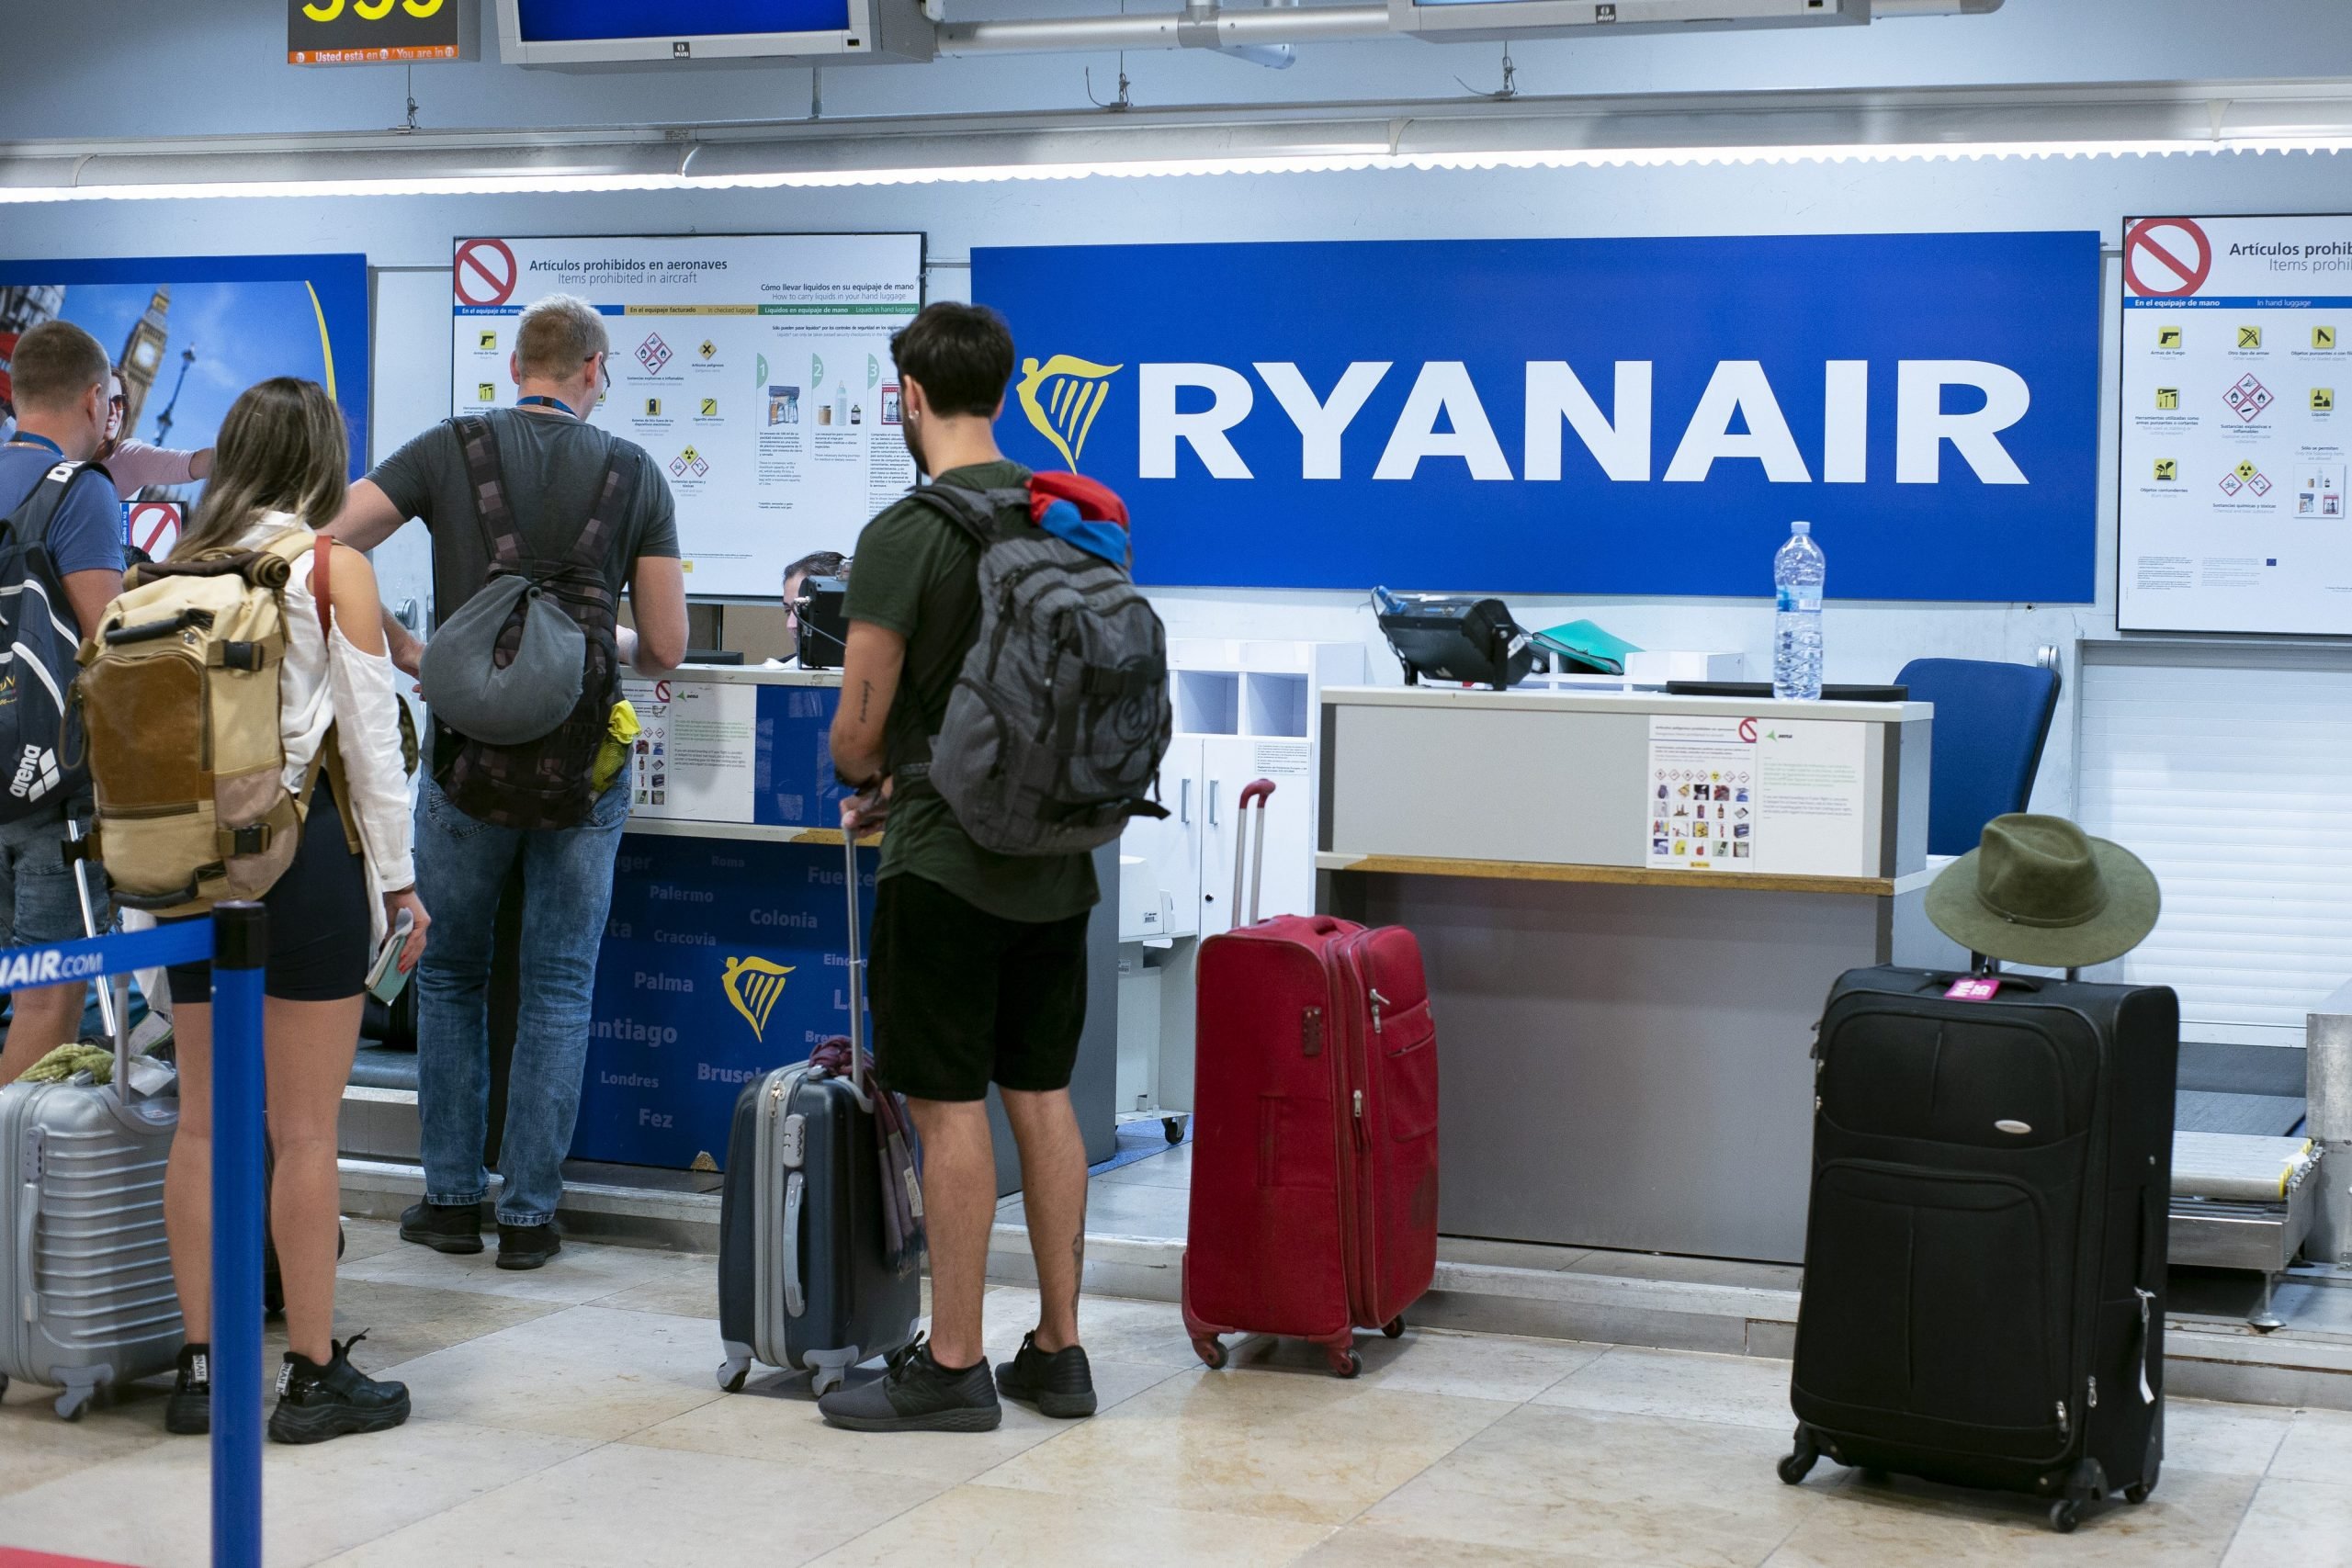 British tourist in his 60s collapses and dies in Spain while waiting to board Ryanair flight home